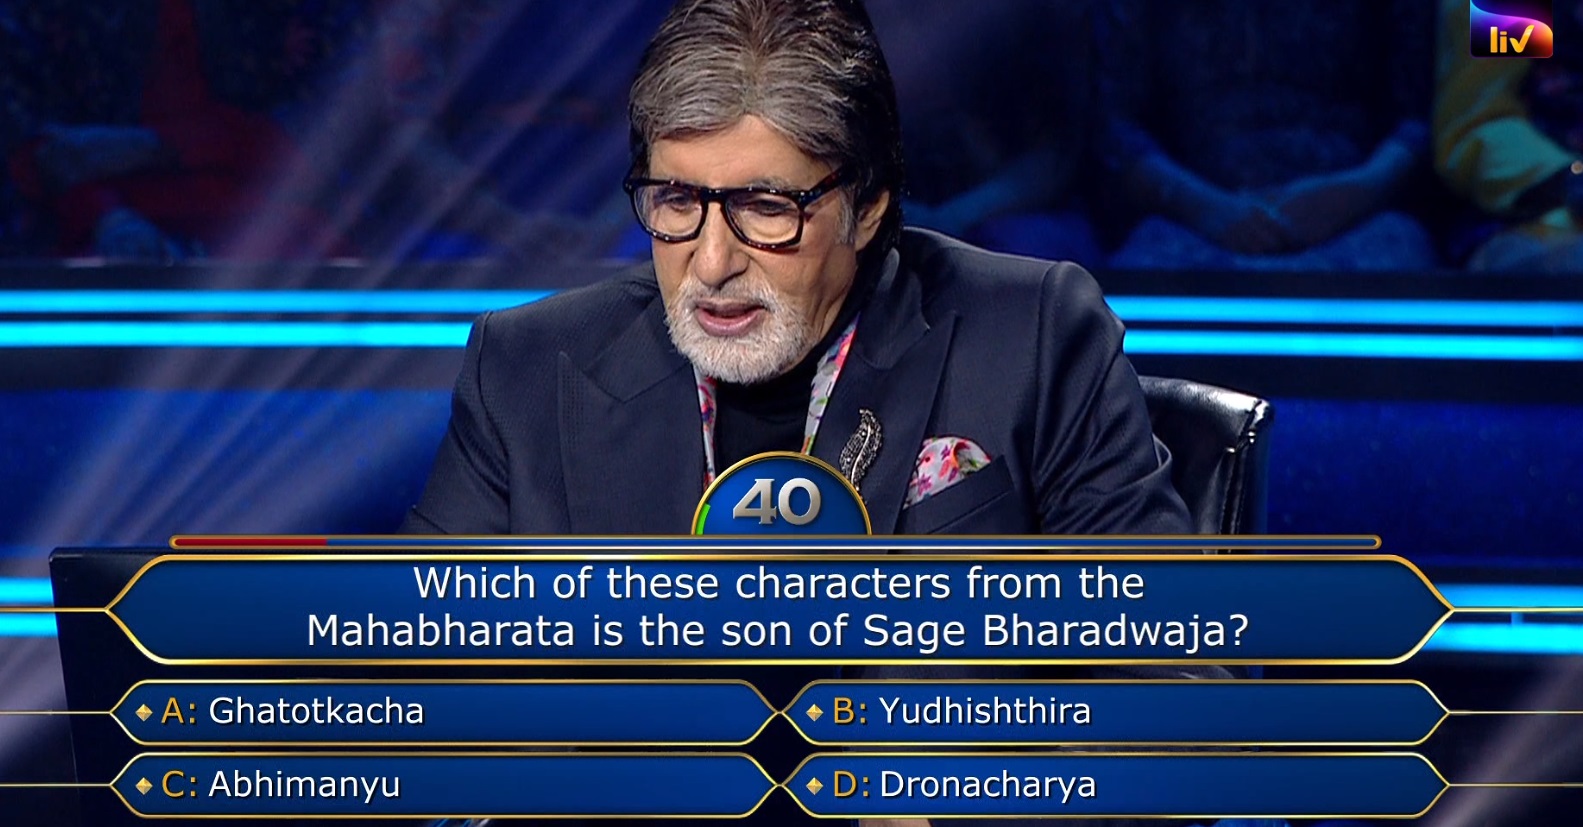 Ques : Which of these characters from the Mahabharata is the son of Sage Bharadwaja?